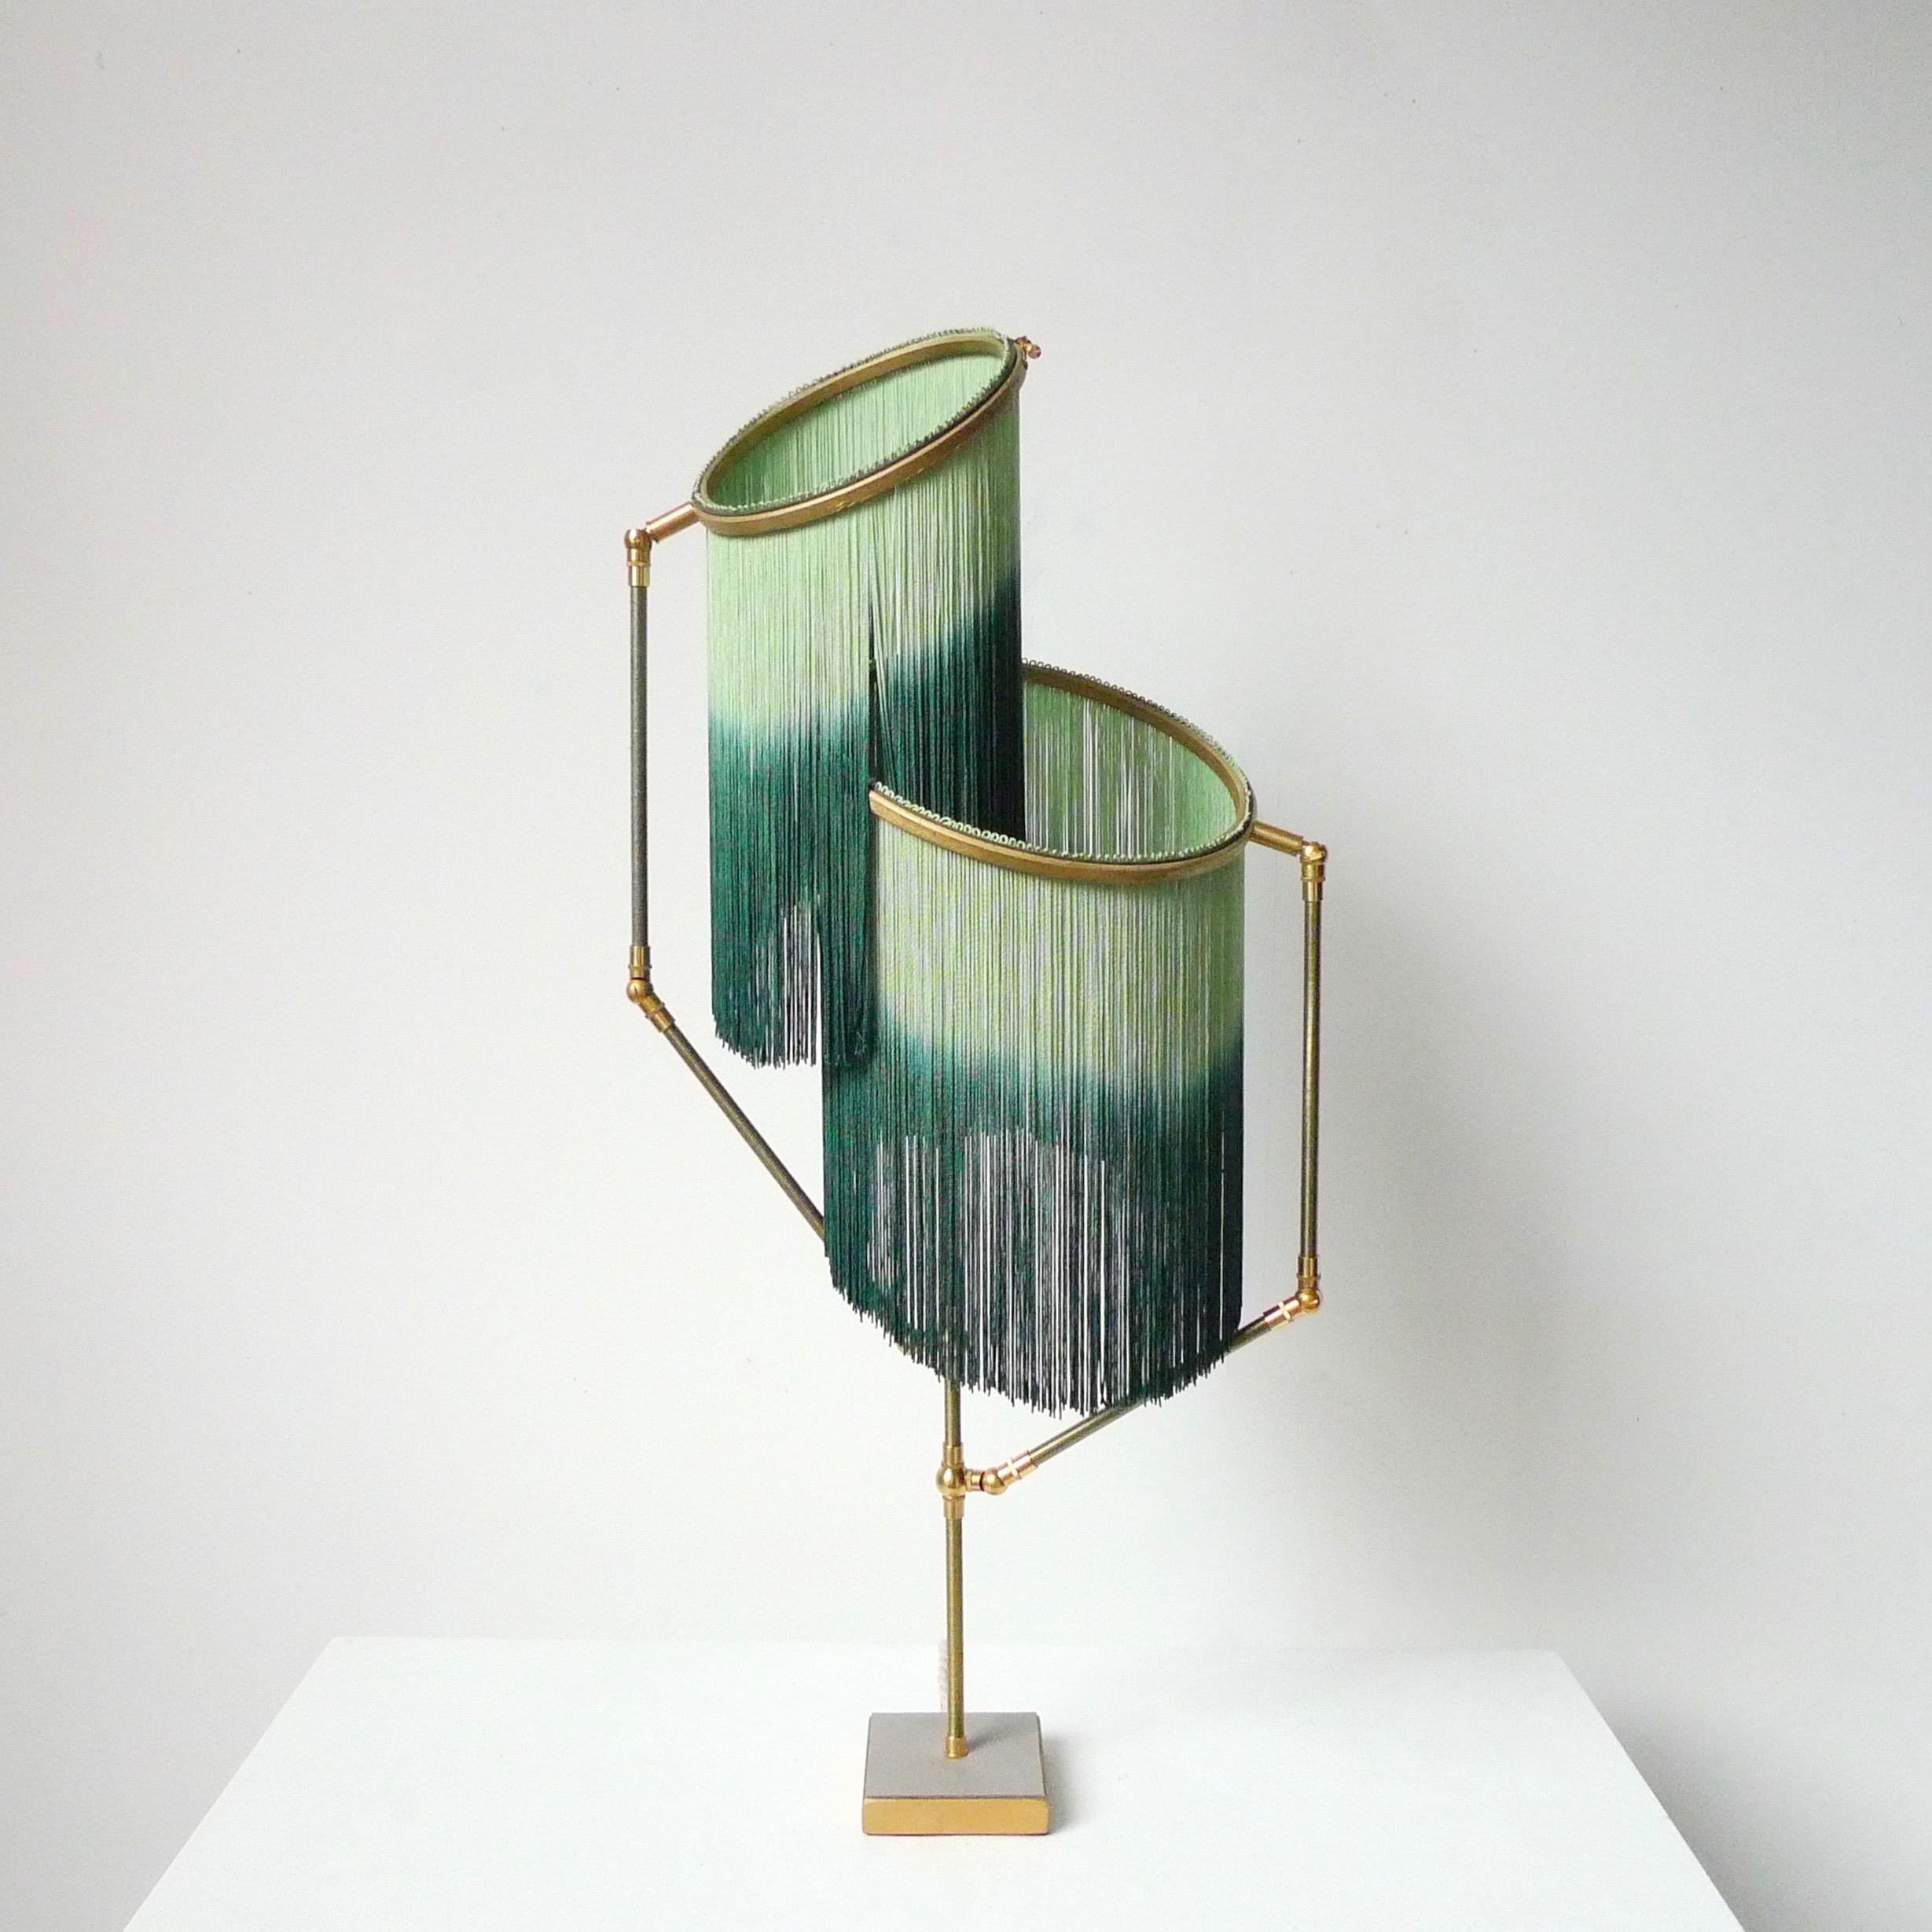 Charme table lamp by Sander Bottinga.

Dimensions: H 73 x W 38 x D 25 cm
Hand-sculpted in brass, leather, wood and dip dyed colored Fringes in viscose.
The movable arms makes it possible to move the circles with fringes in differed